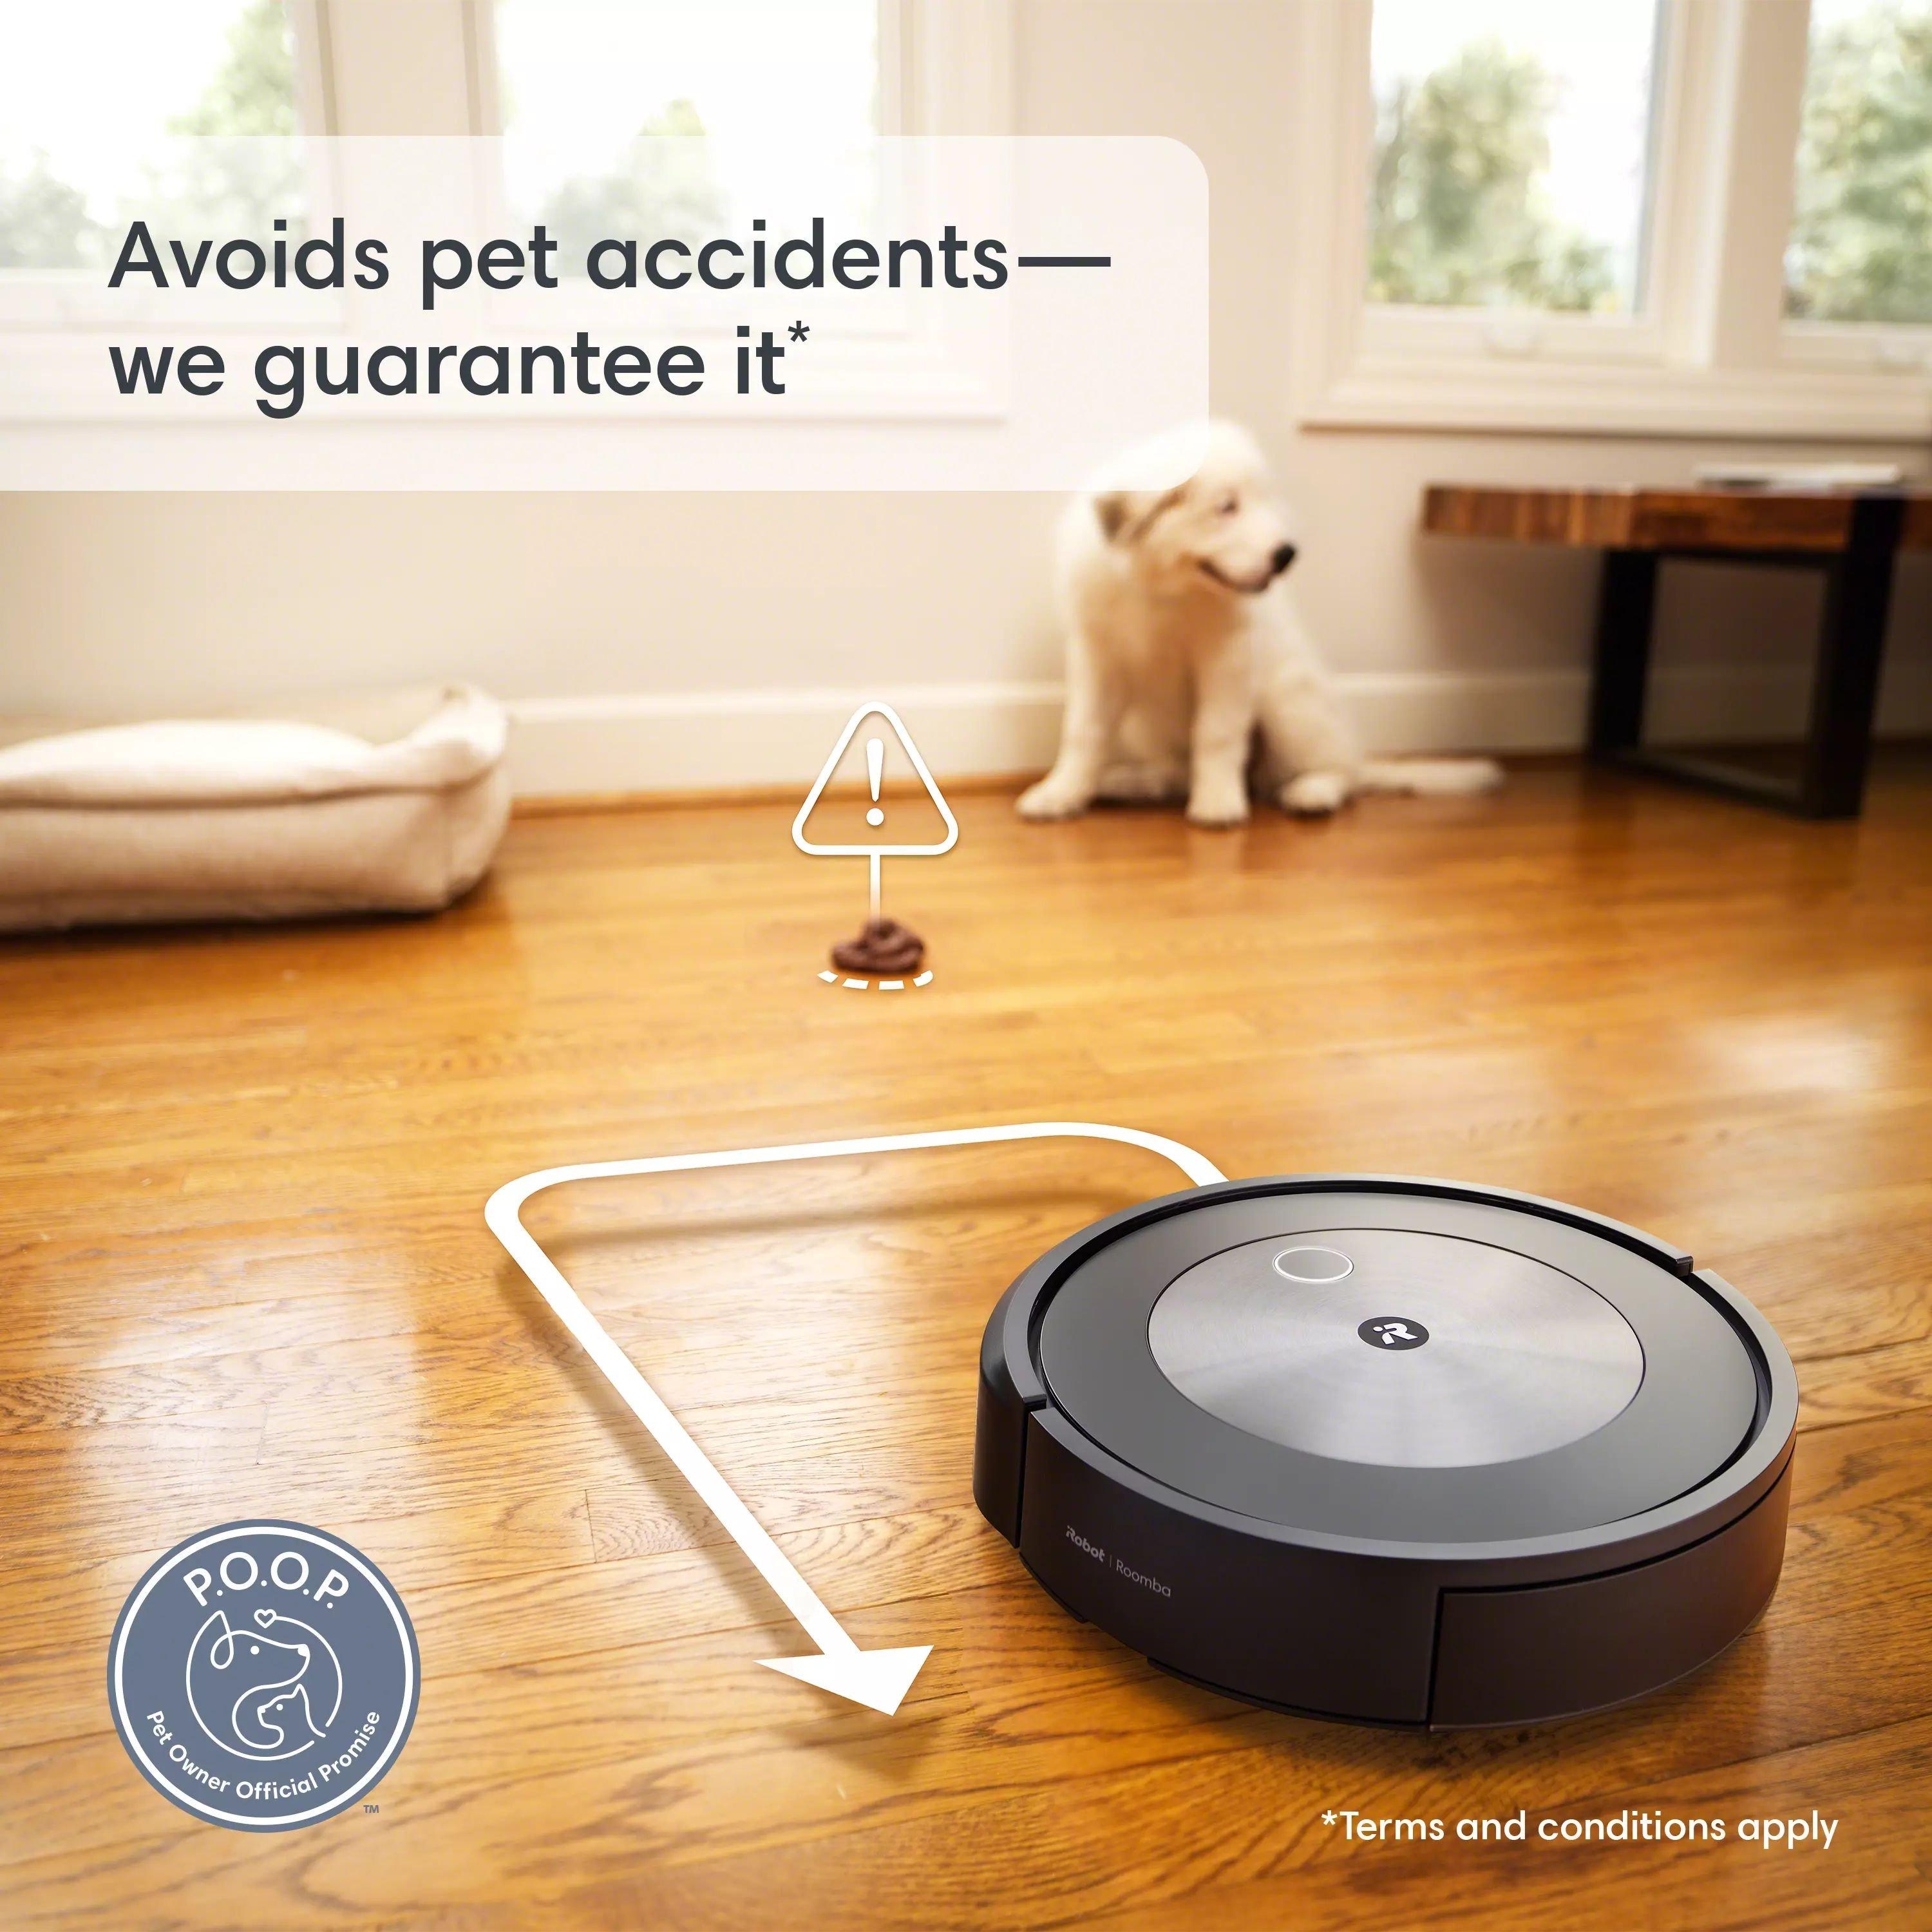 iRobot Roomba j7 review: A smarter Roomba that steers clear of pet poo